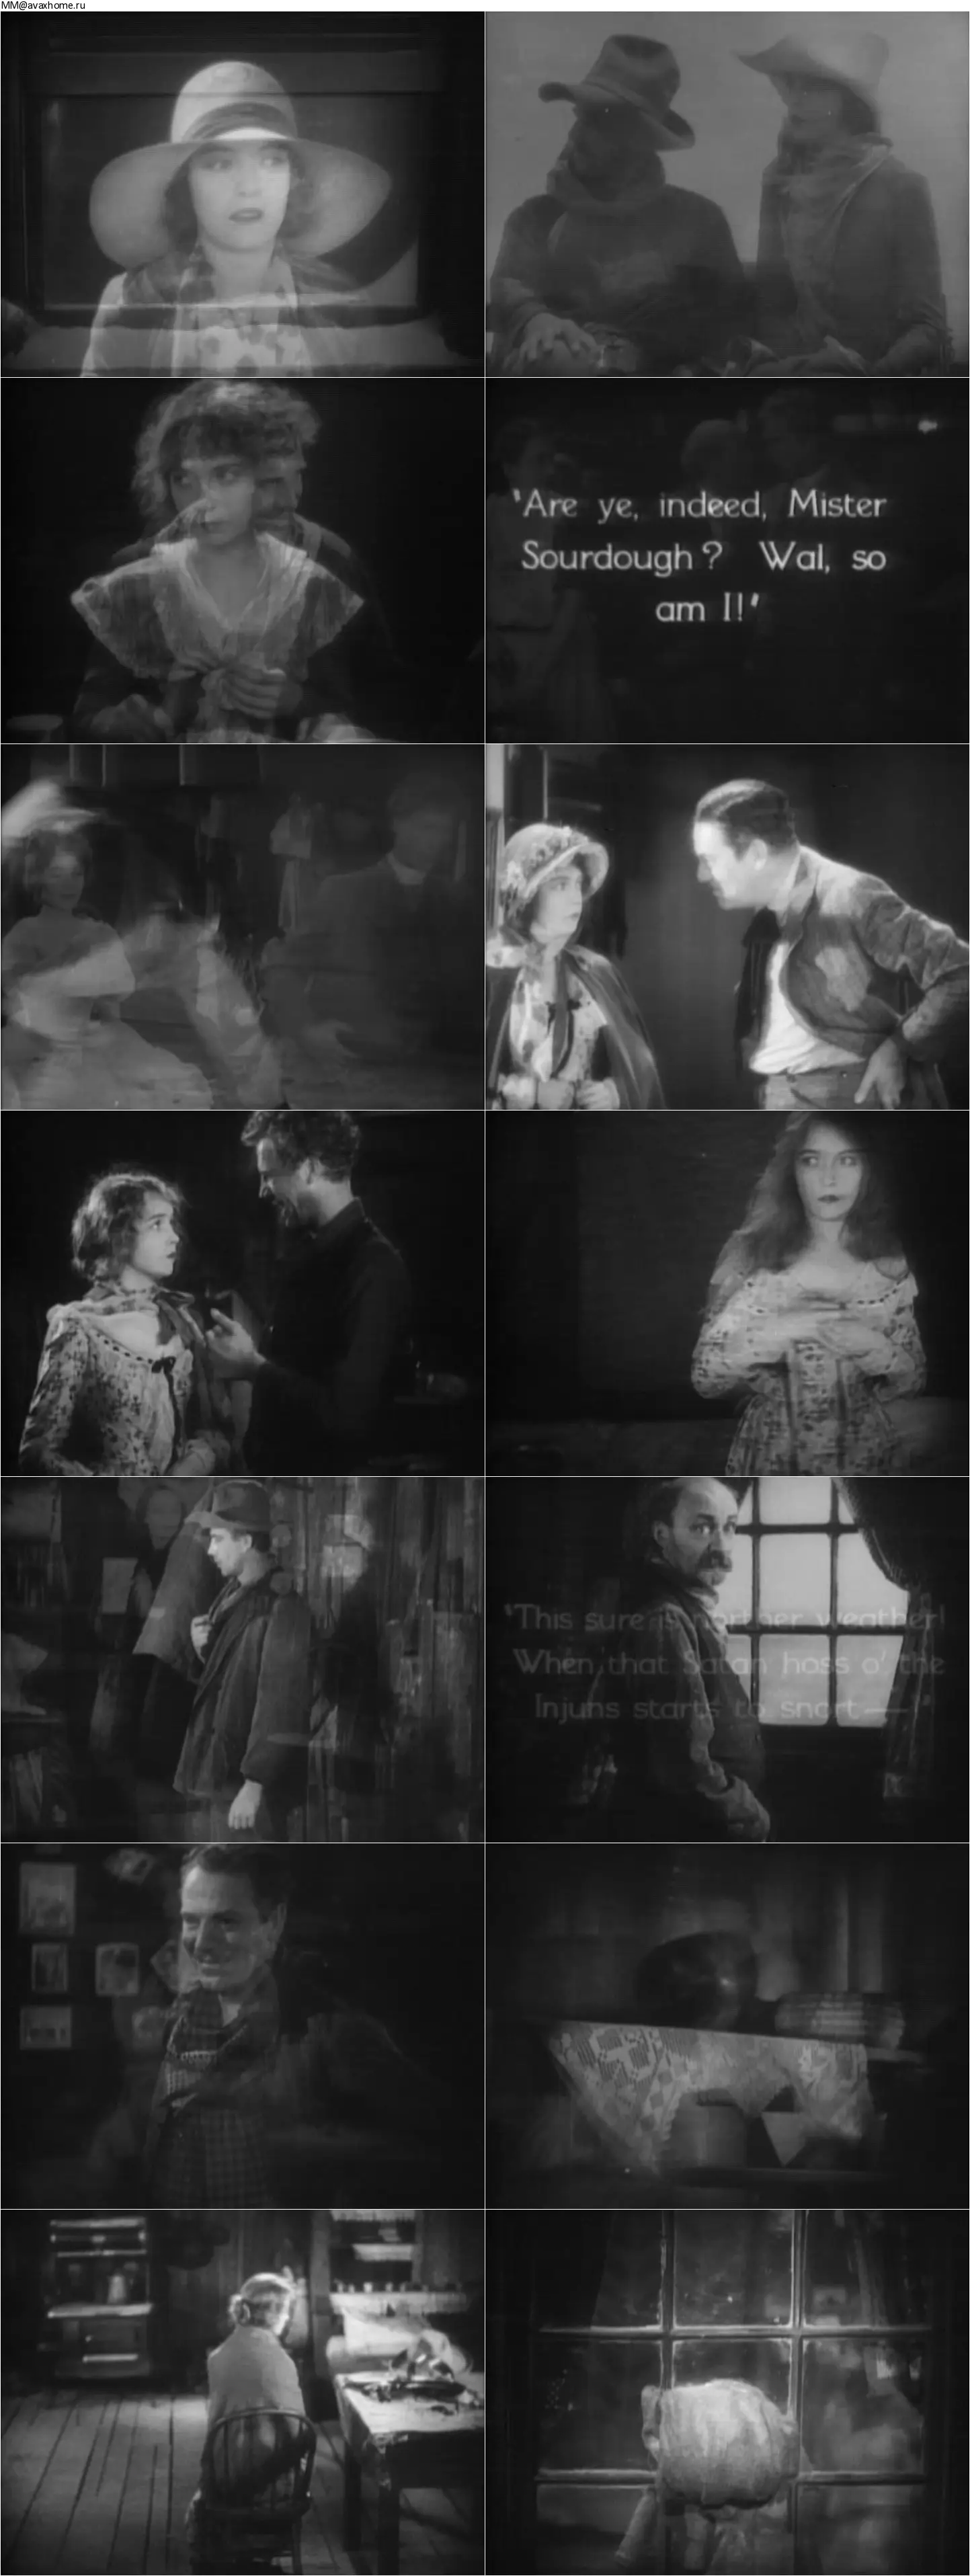 The Wind (1928)